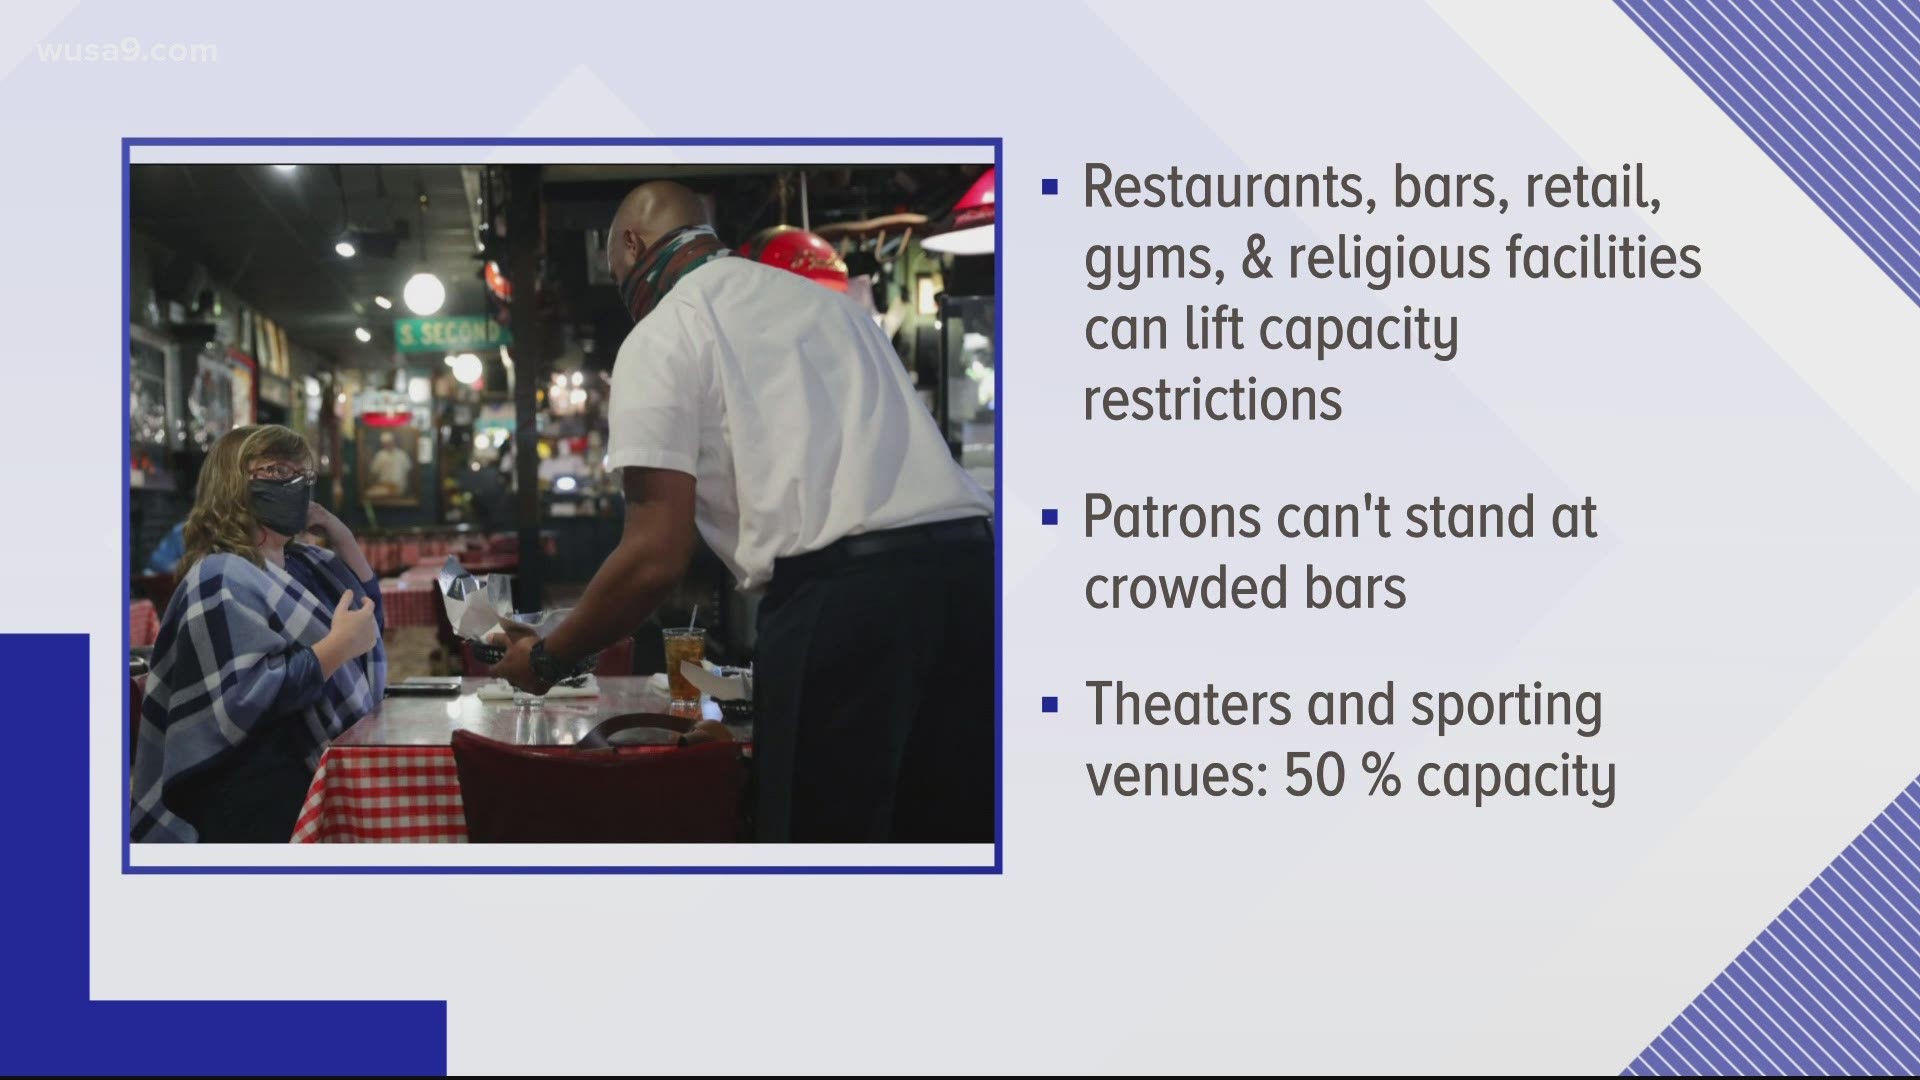 Maryland Gov. Larry Hogan announced capacity limits at bars and restaurants will be lifted Friday. So far, only Washington County says it will follow new guidance.